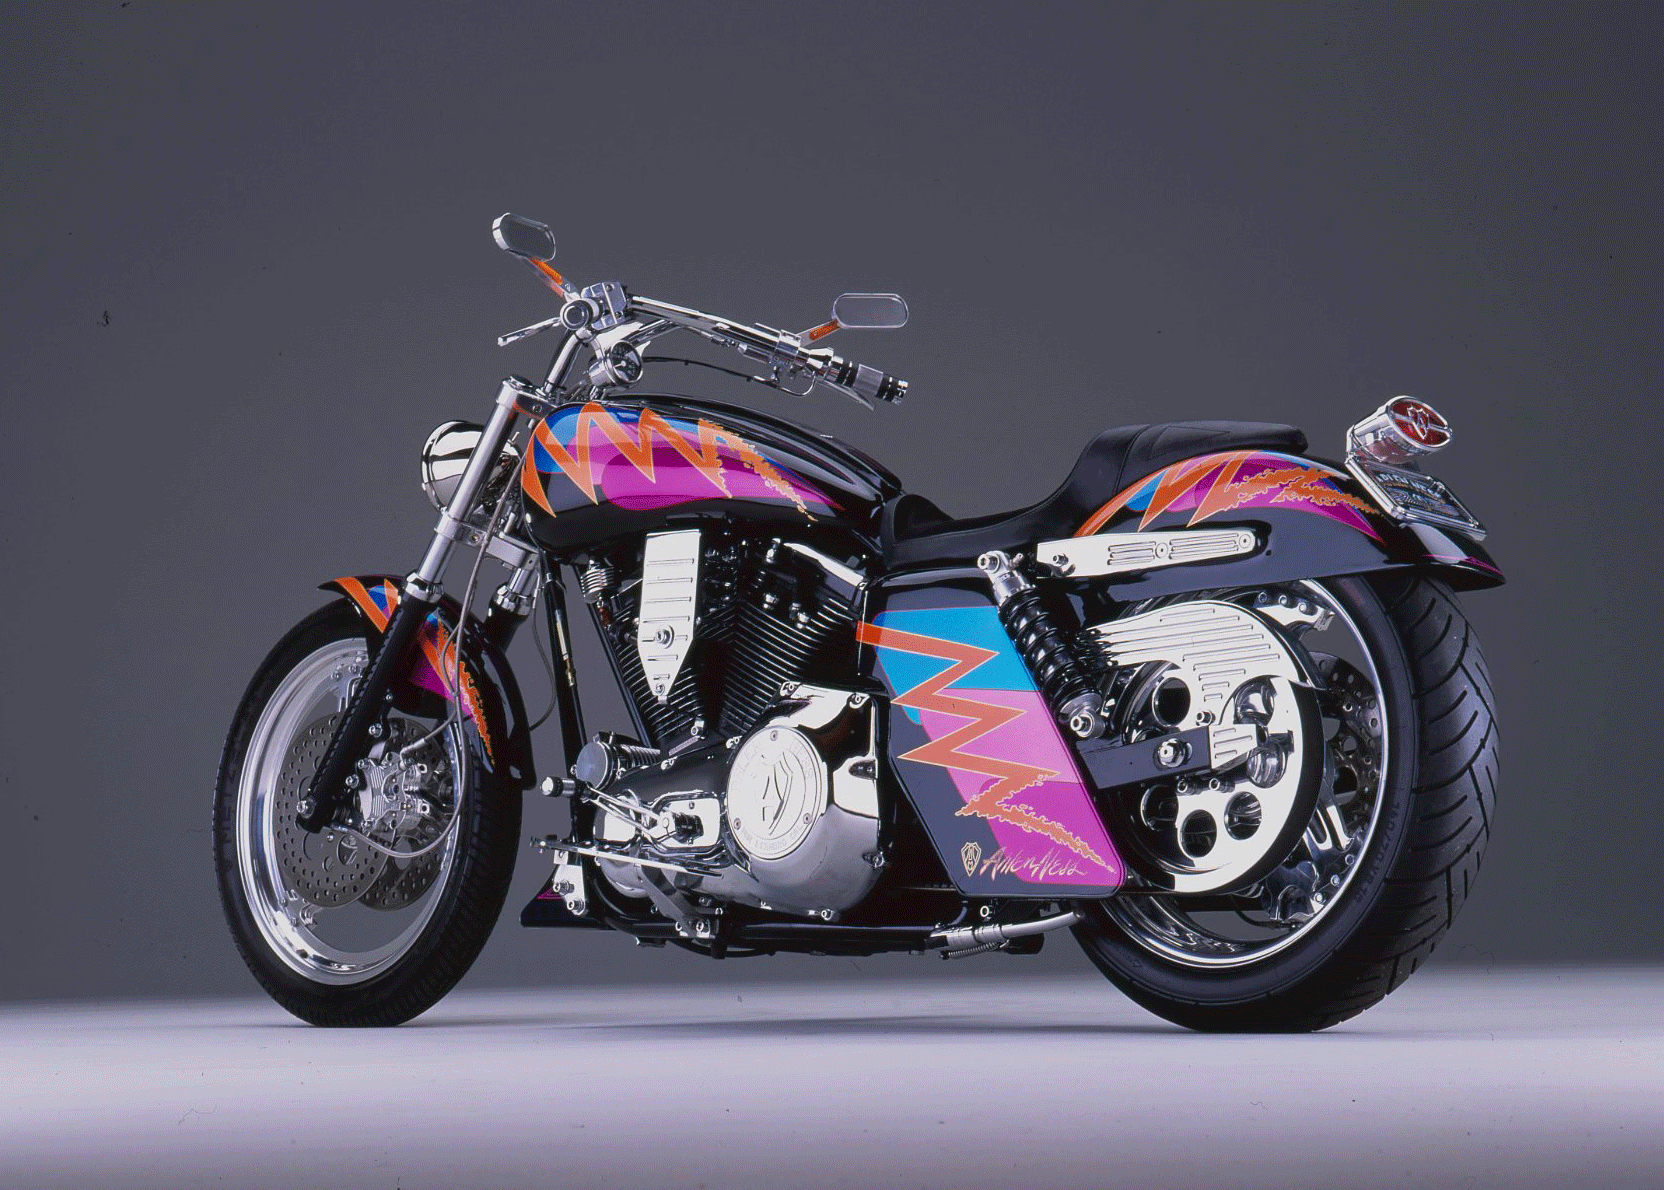 Radical orange zig zags with cyan and pink underneath brighten up this Arlen Ness Dyna Glide.”